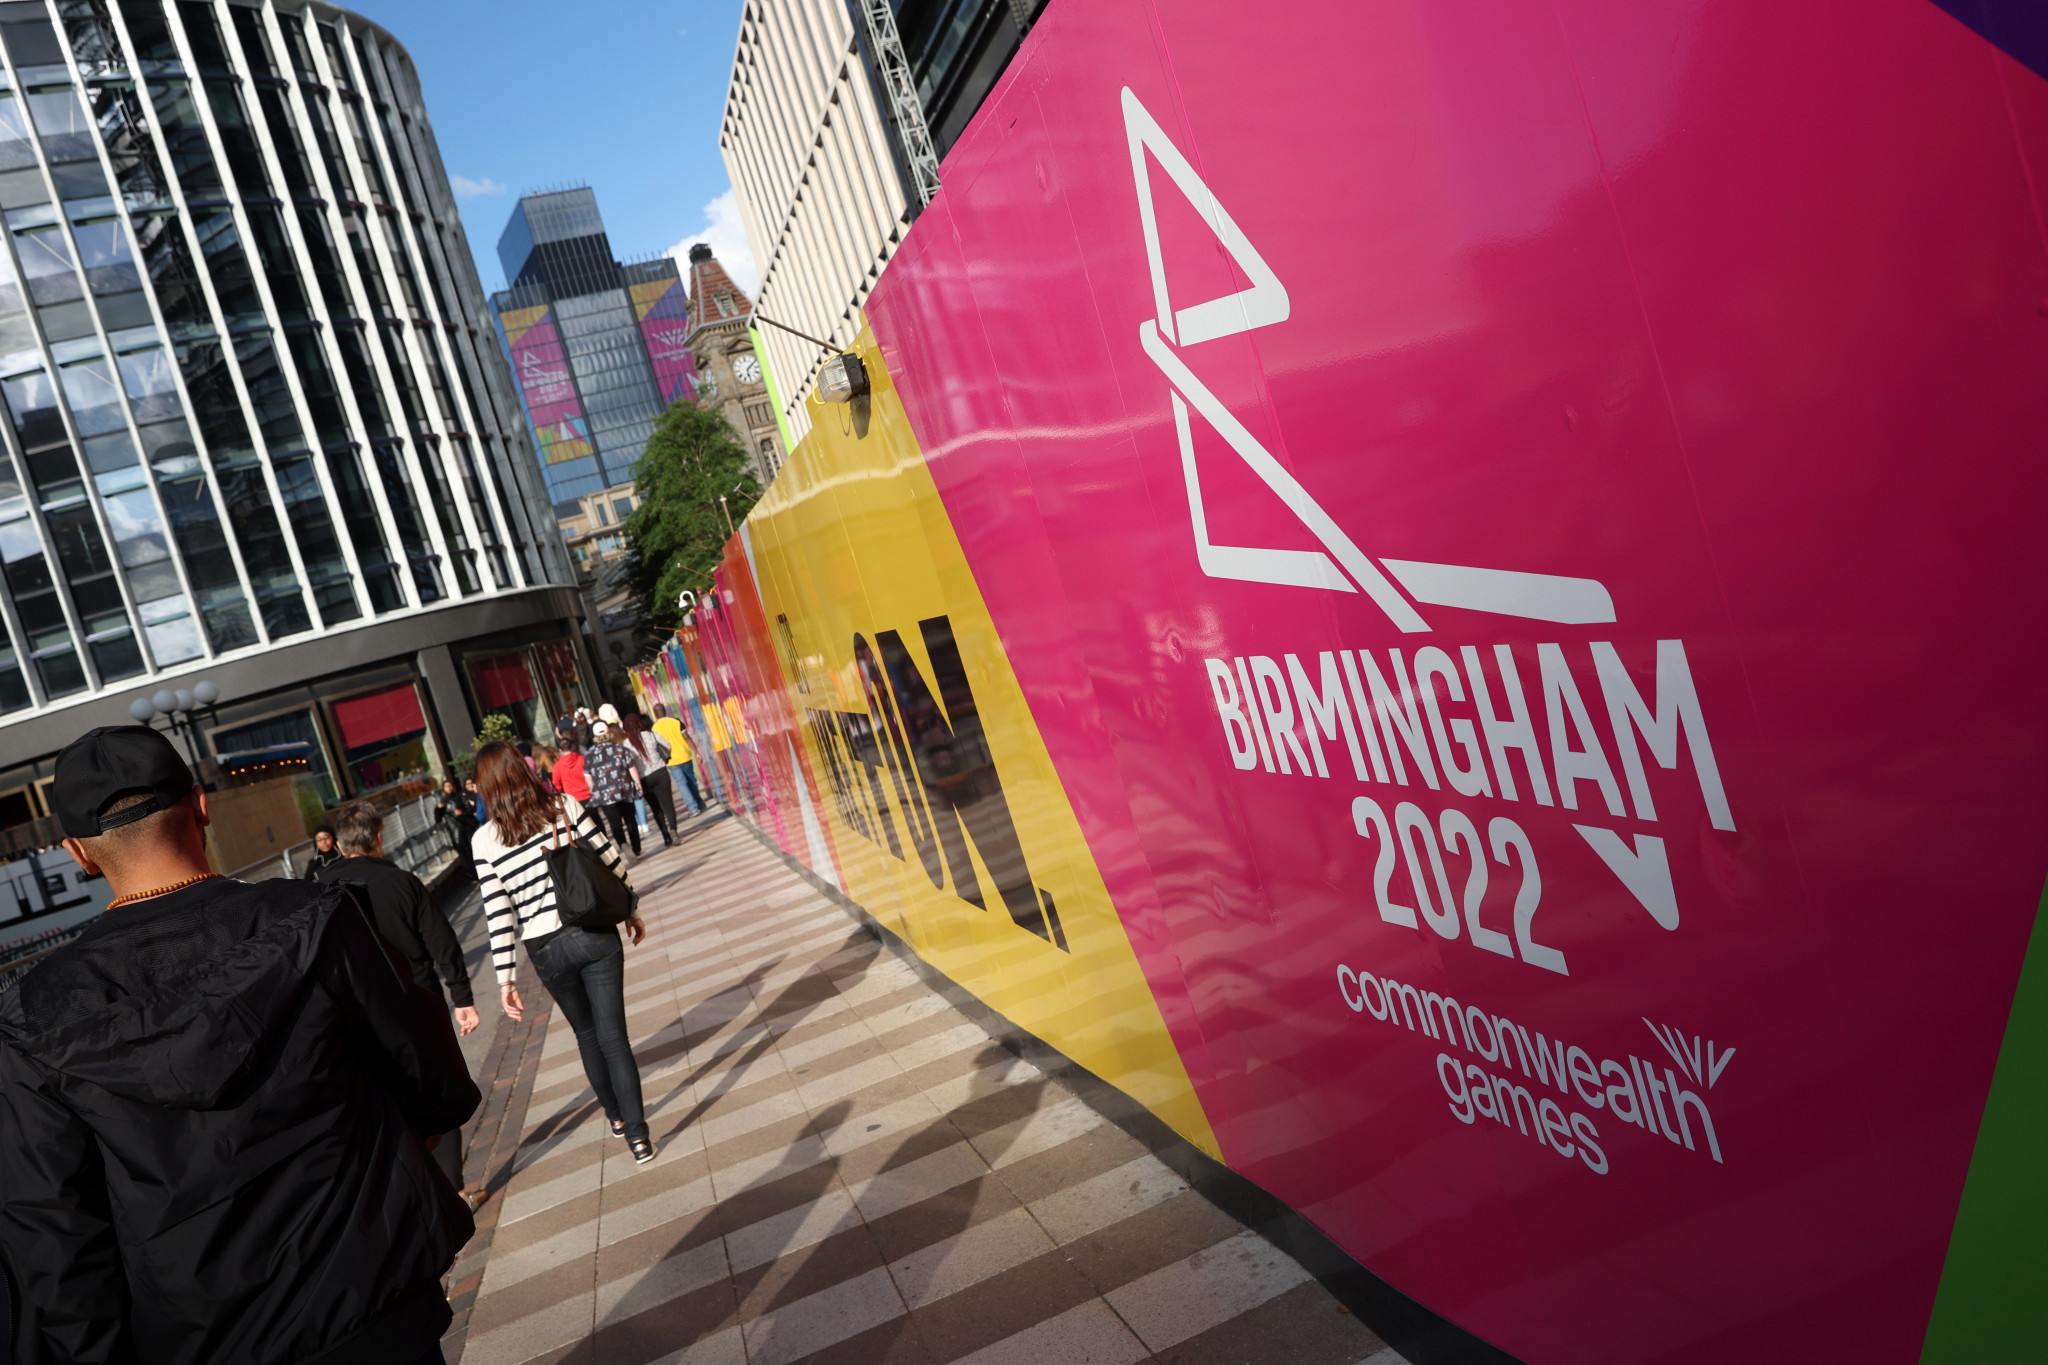 Several athletes attempted to seek refuge in the United Kingdom at the Birmingham 2022 Commonwealth Games ©Getty Images